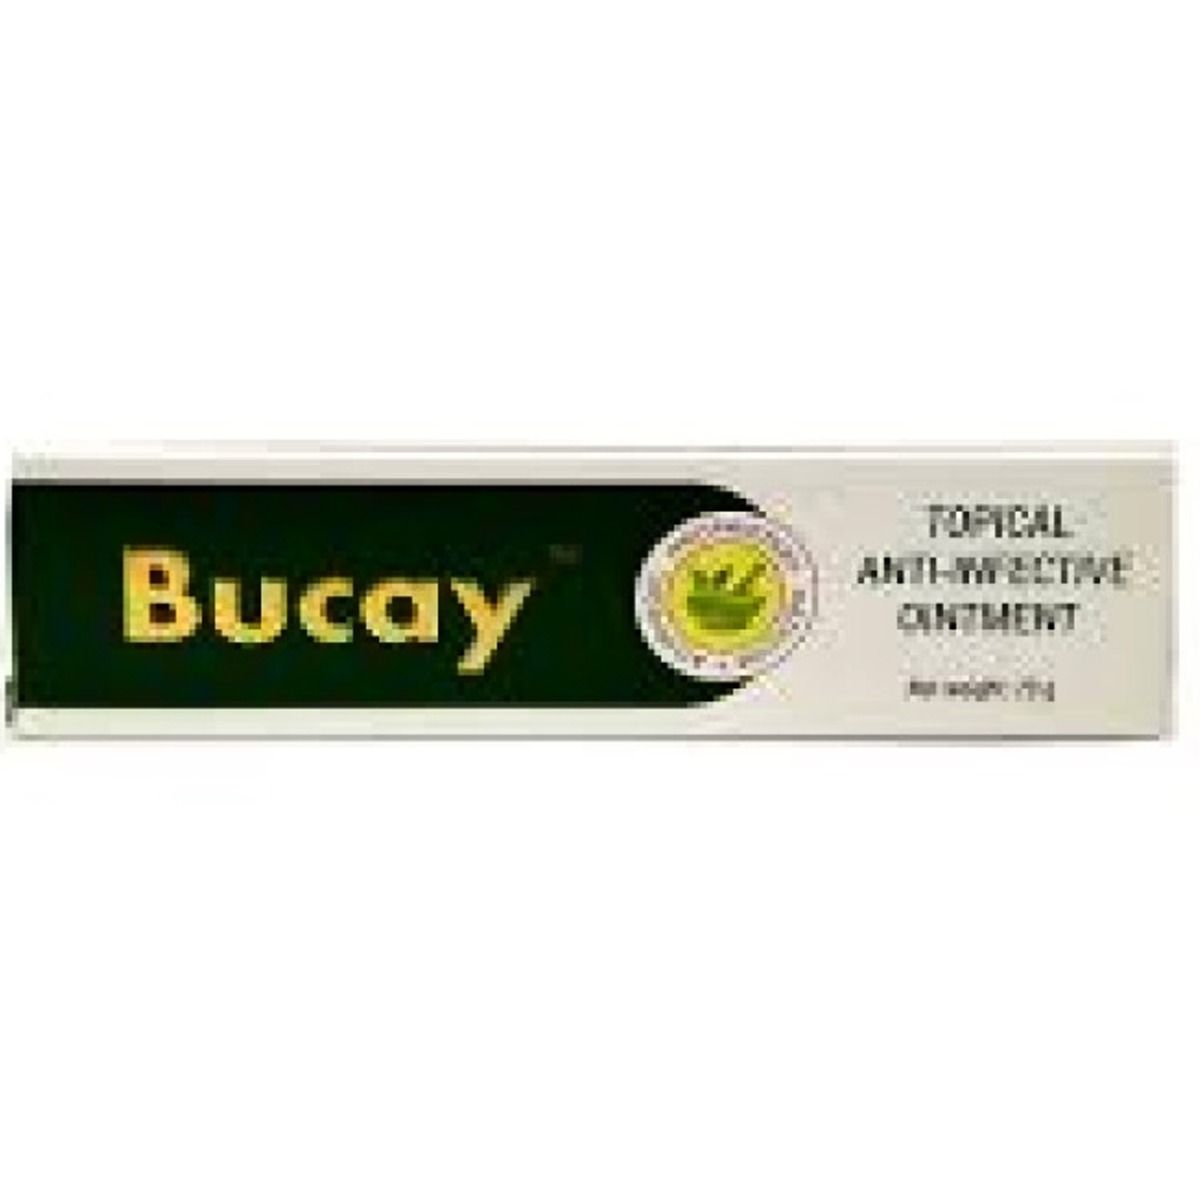 Bucay Ointment, 20 gm, Pack of 1 